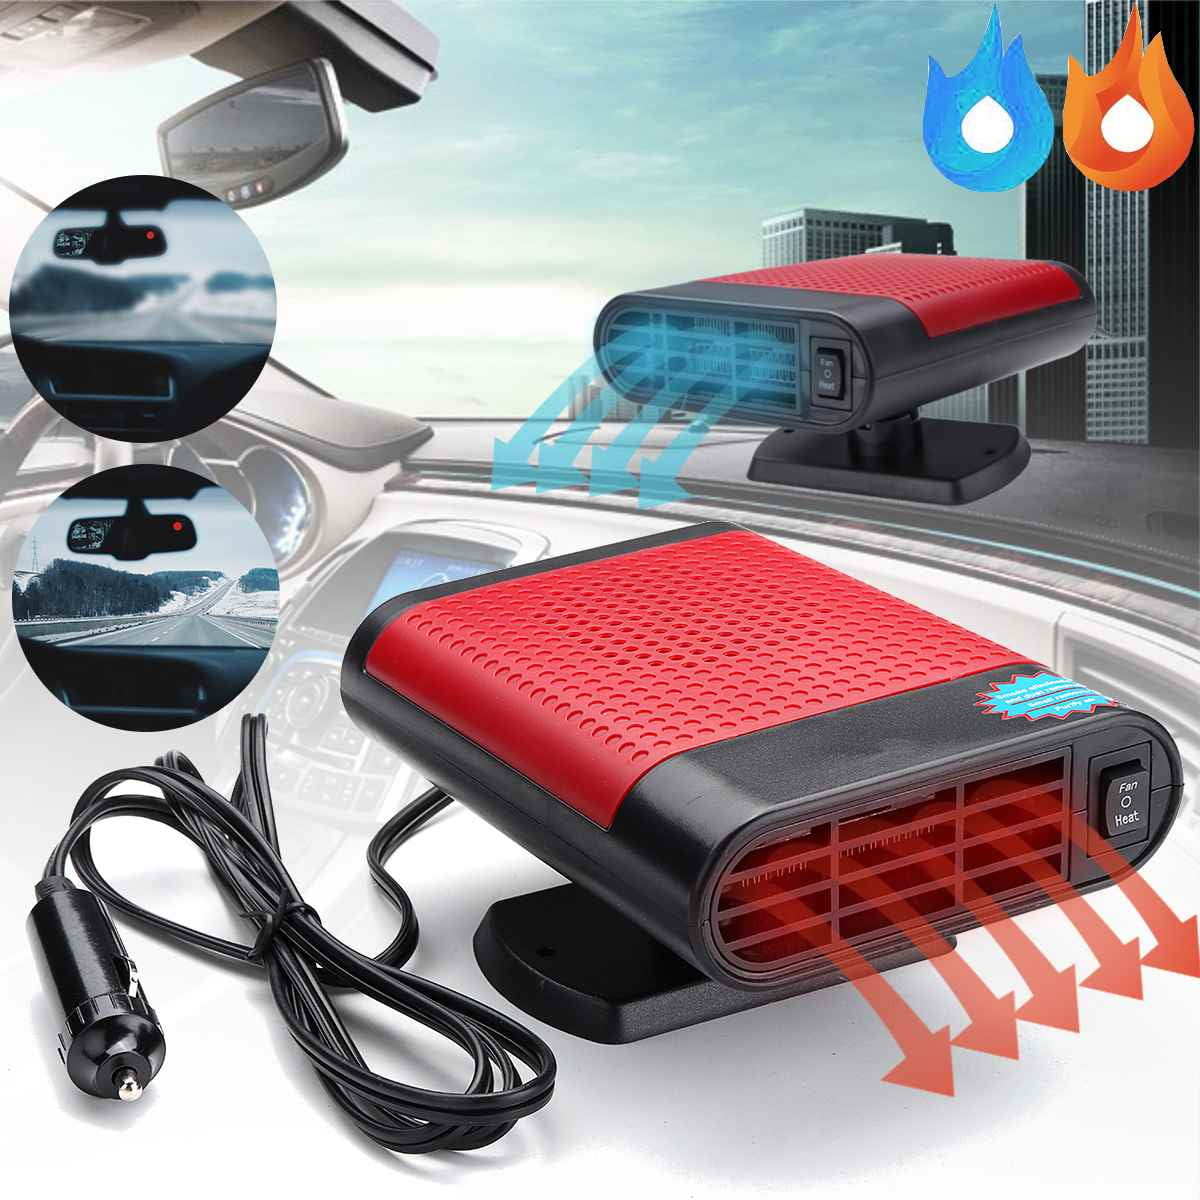 Car Heater 12V 150W Car Heater 2 in 1 Heating Fan Defroster Demister Car Amplifier Cooling Fans Automotive Replacement Heater for Car SUV Truck Rv Trailer 